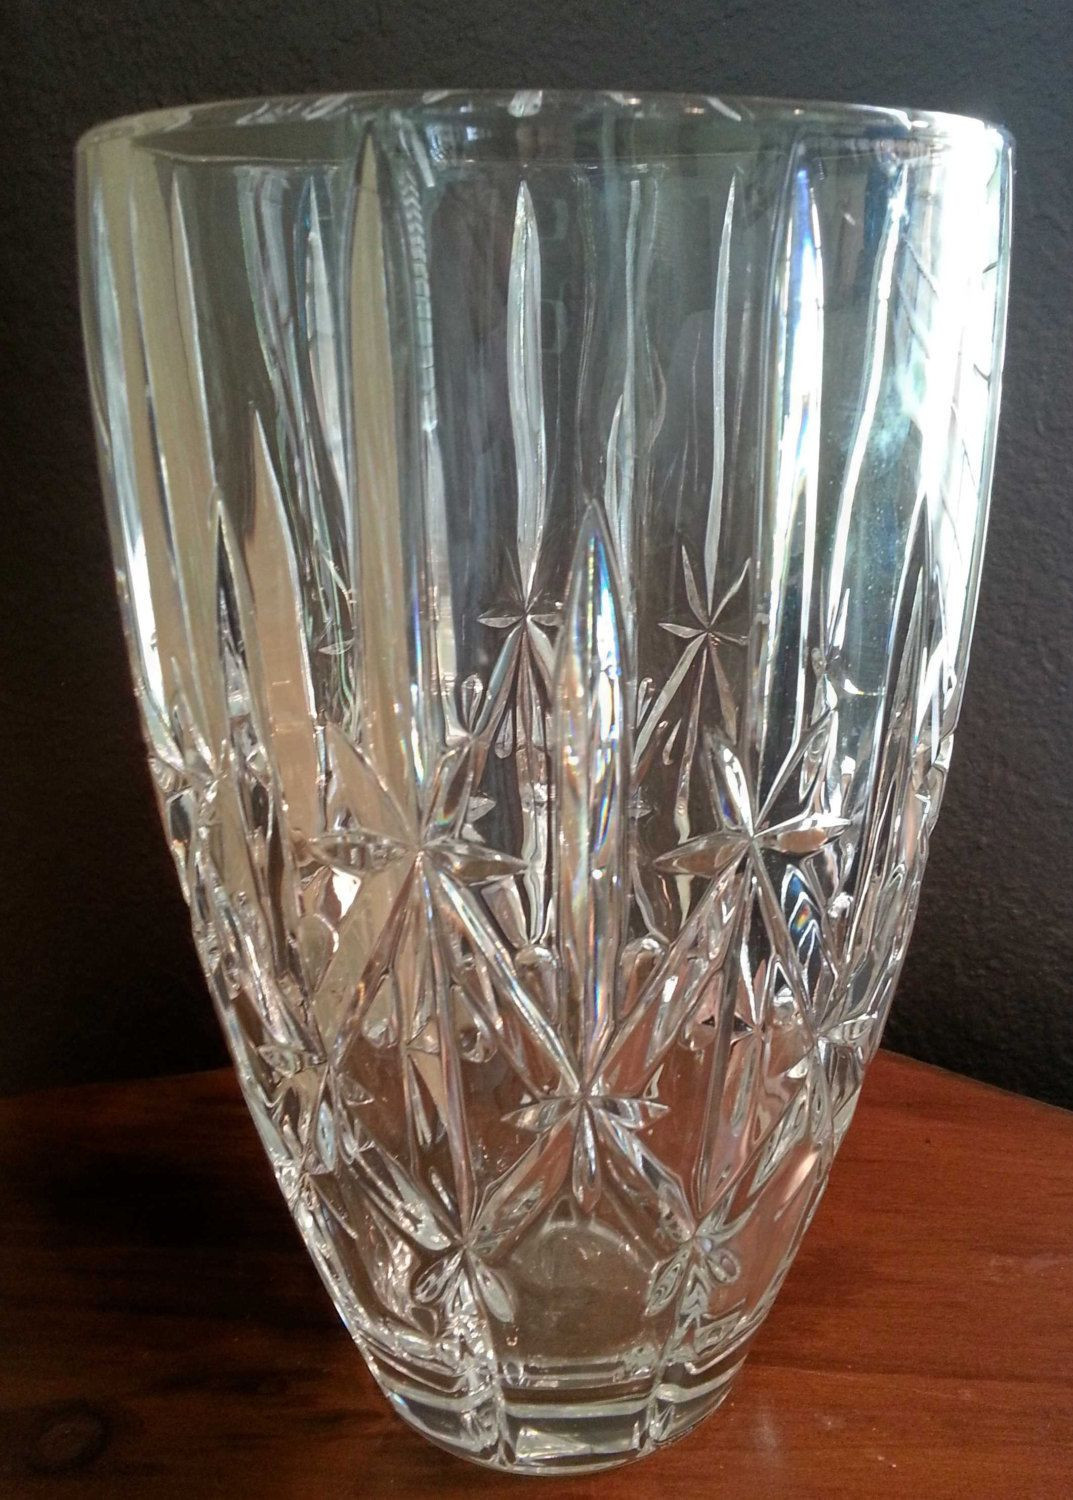 28 Amazing Waterford Crystal Vase Small 2024 free download waterford crystal vase small of waterford crystal vases pics marquis by waterford sparkle 9 inch in waterford crystal vases pics marquis by waterford sparkle 9 inch vase crystal vase of wate